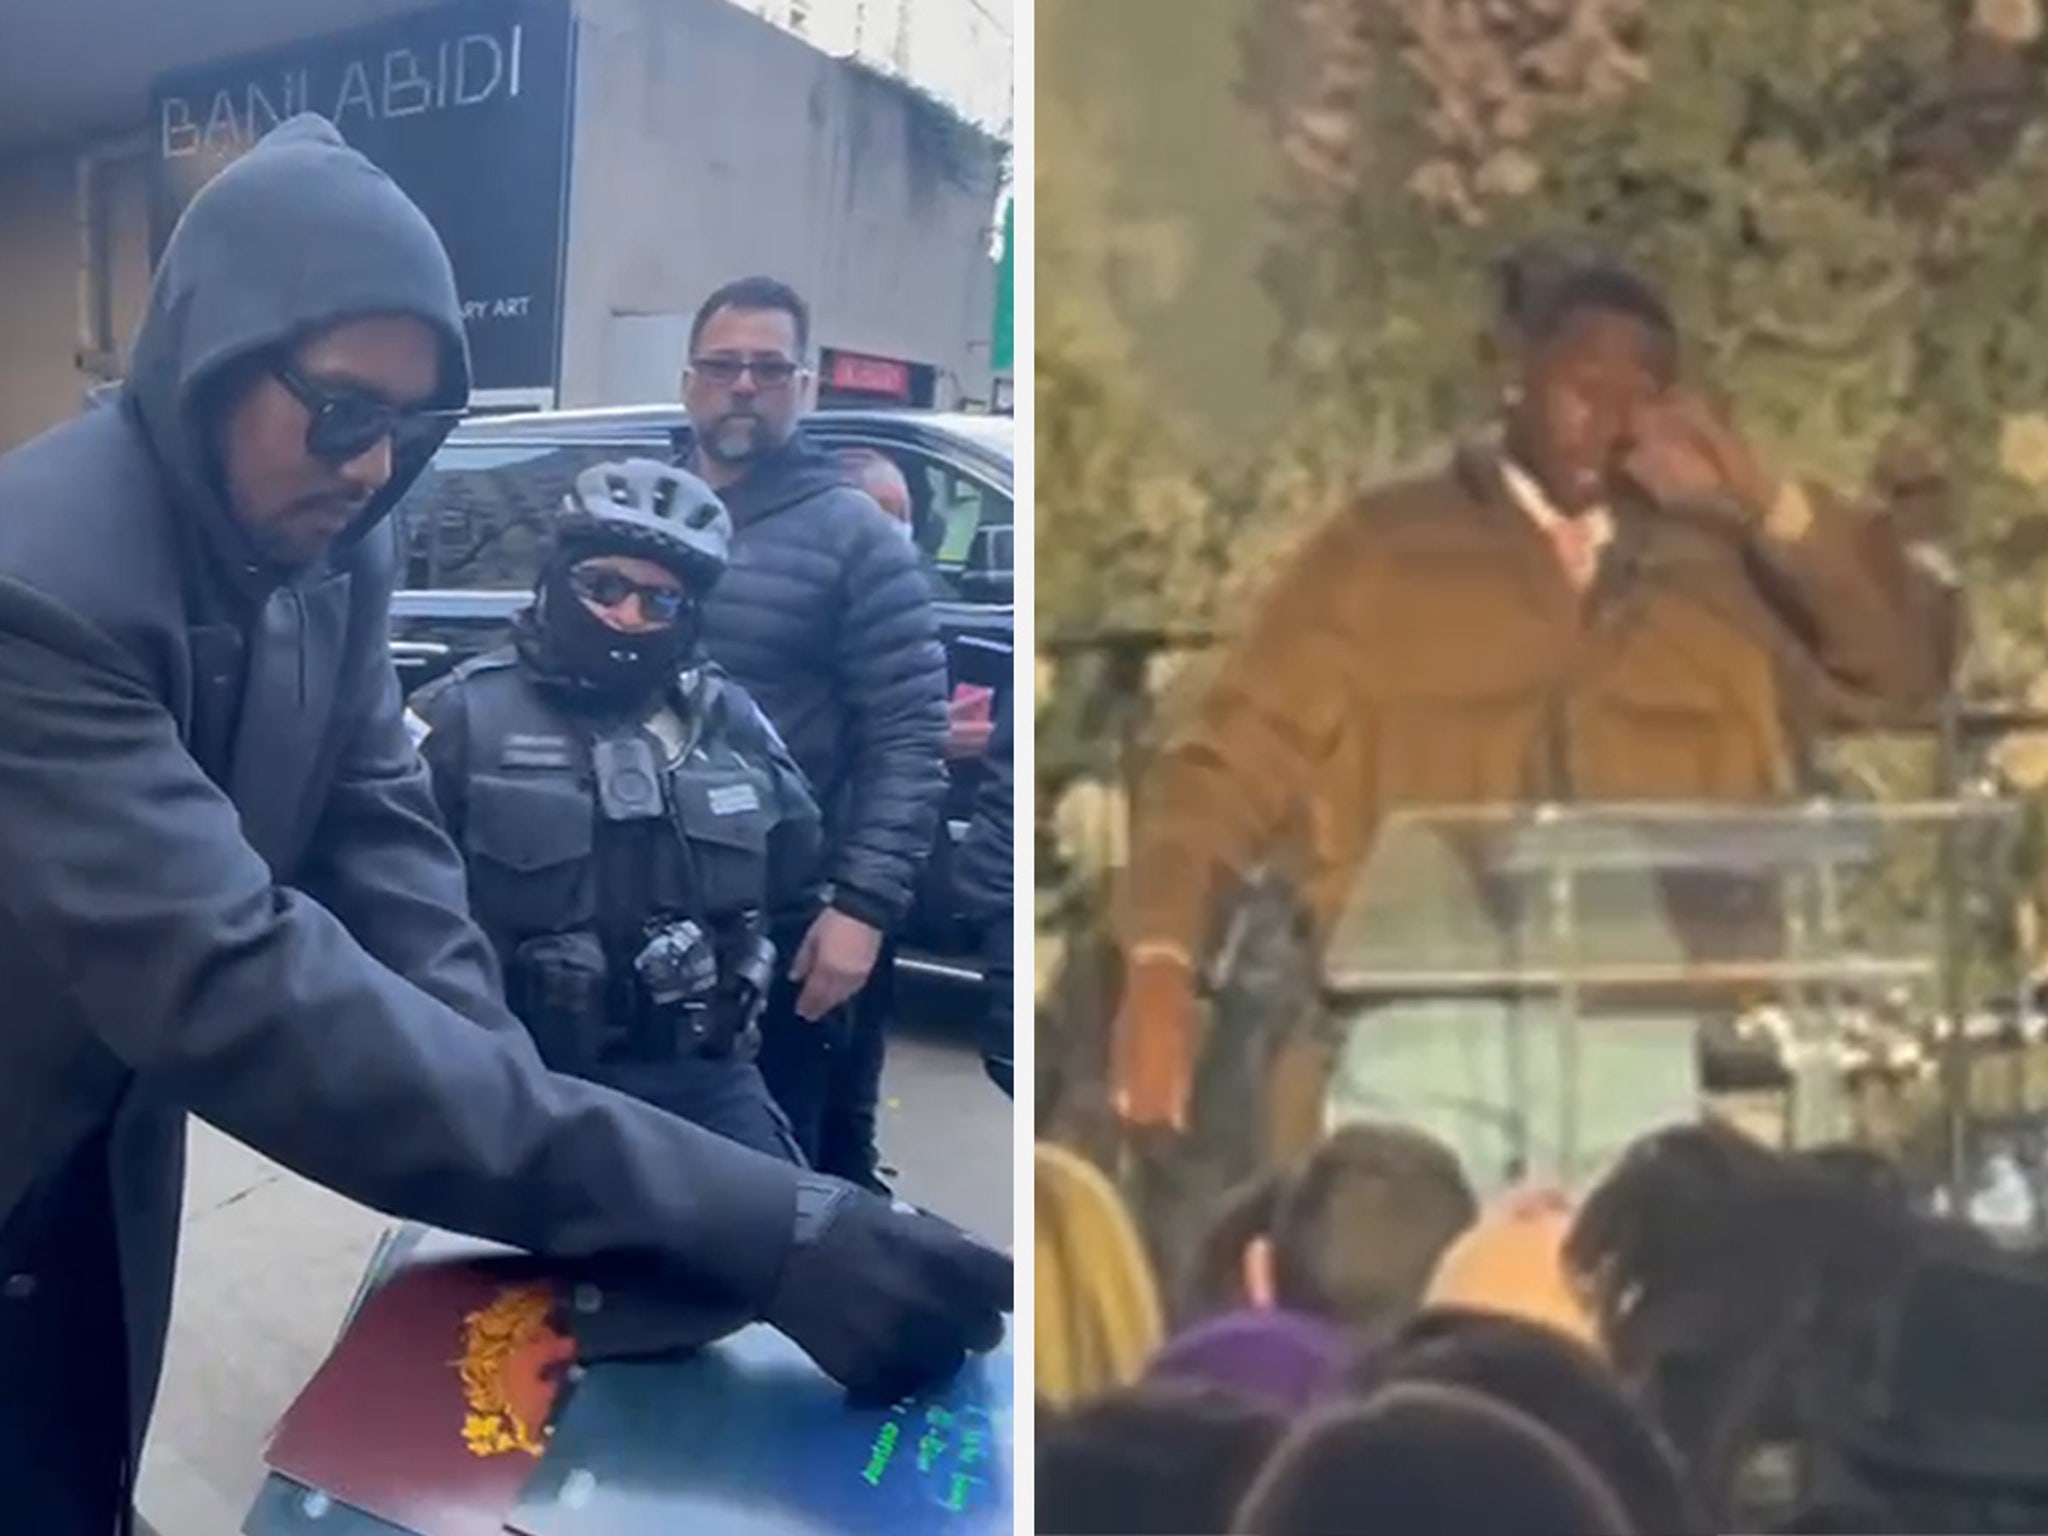 Kanye West, Drake & more attend Virgil Abloh's funeral in Chicago - Capital  XTRA